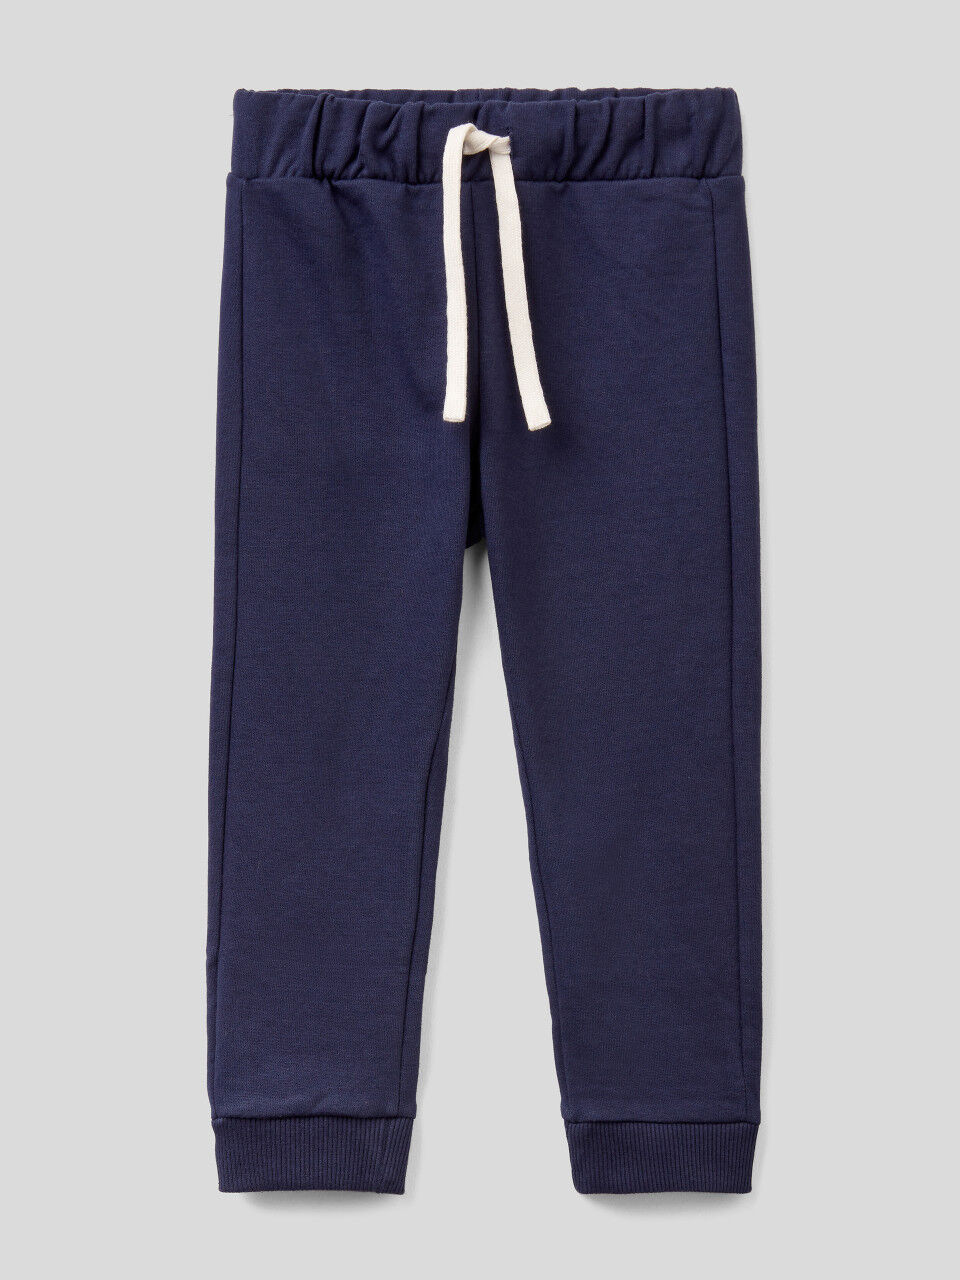 Warm sweatpants with embroidered logo